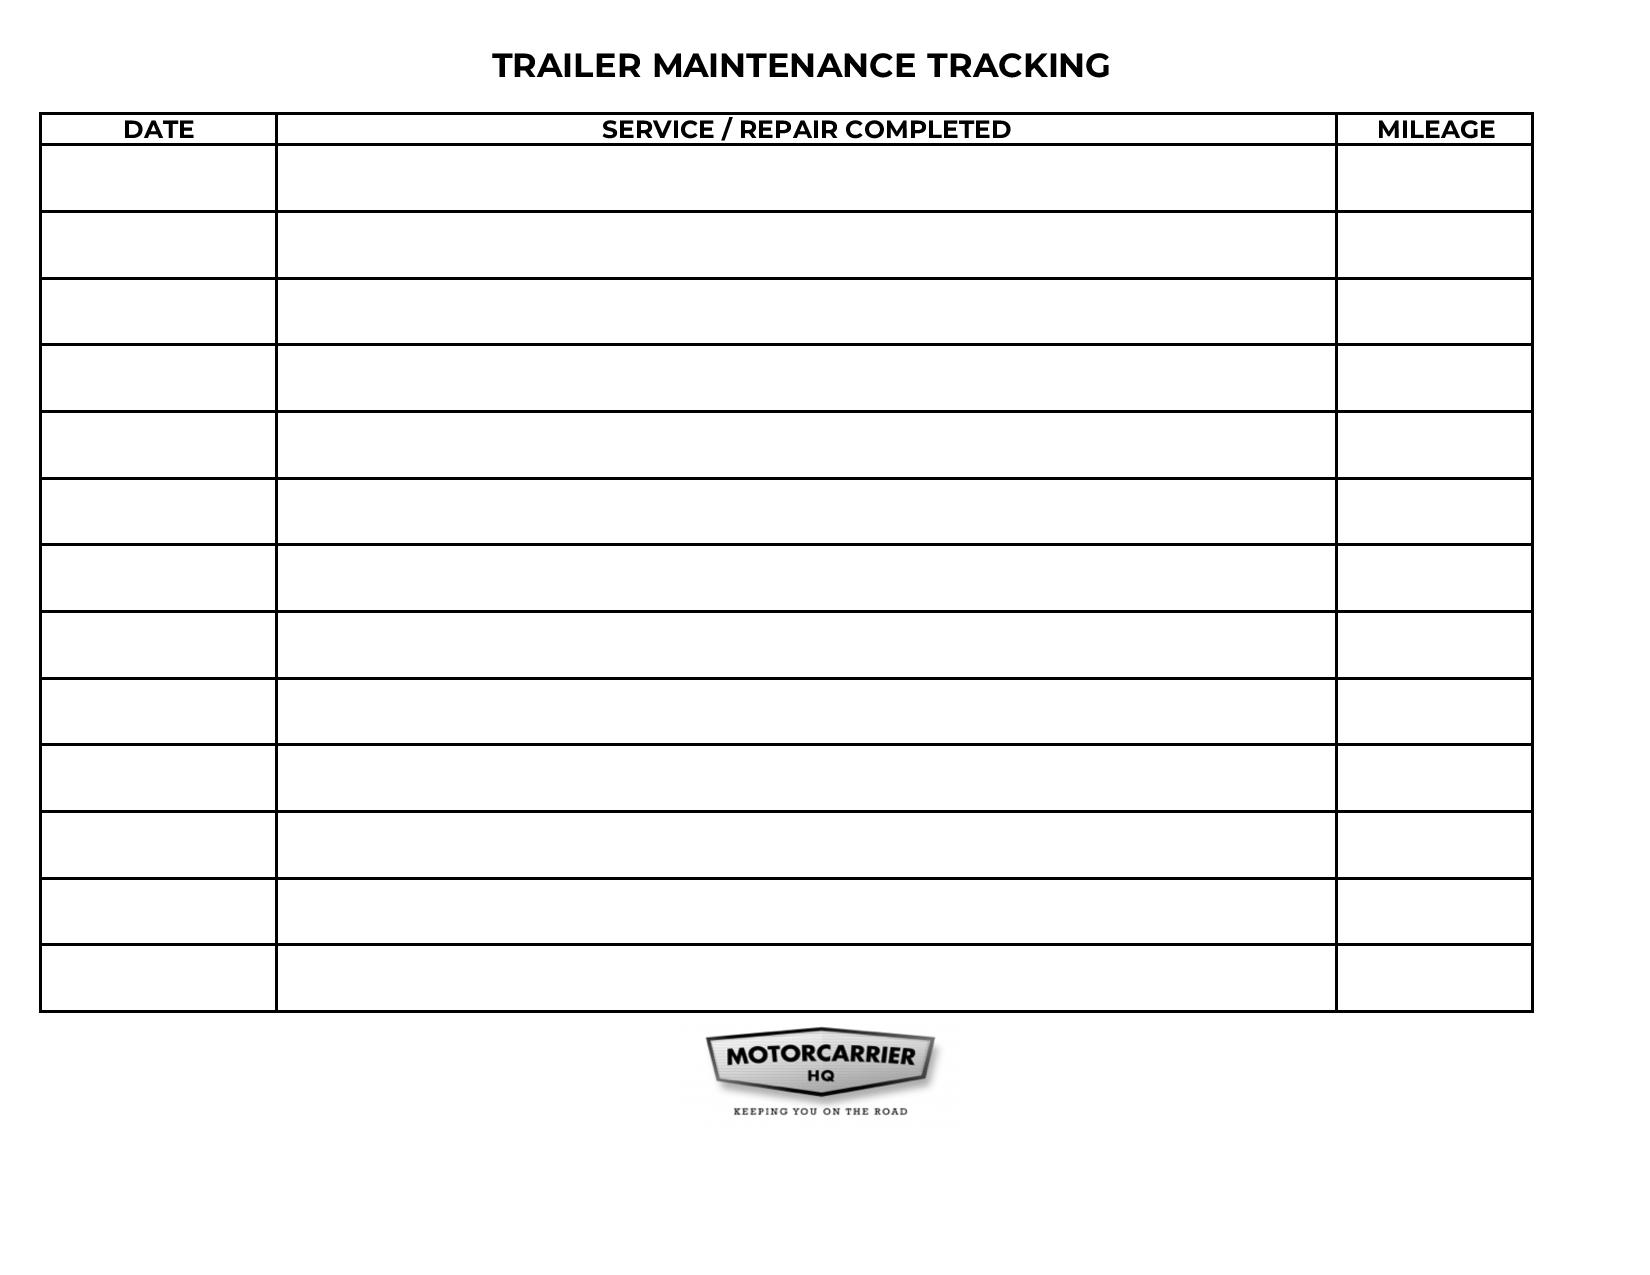 Trailer maintenance tracking page.